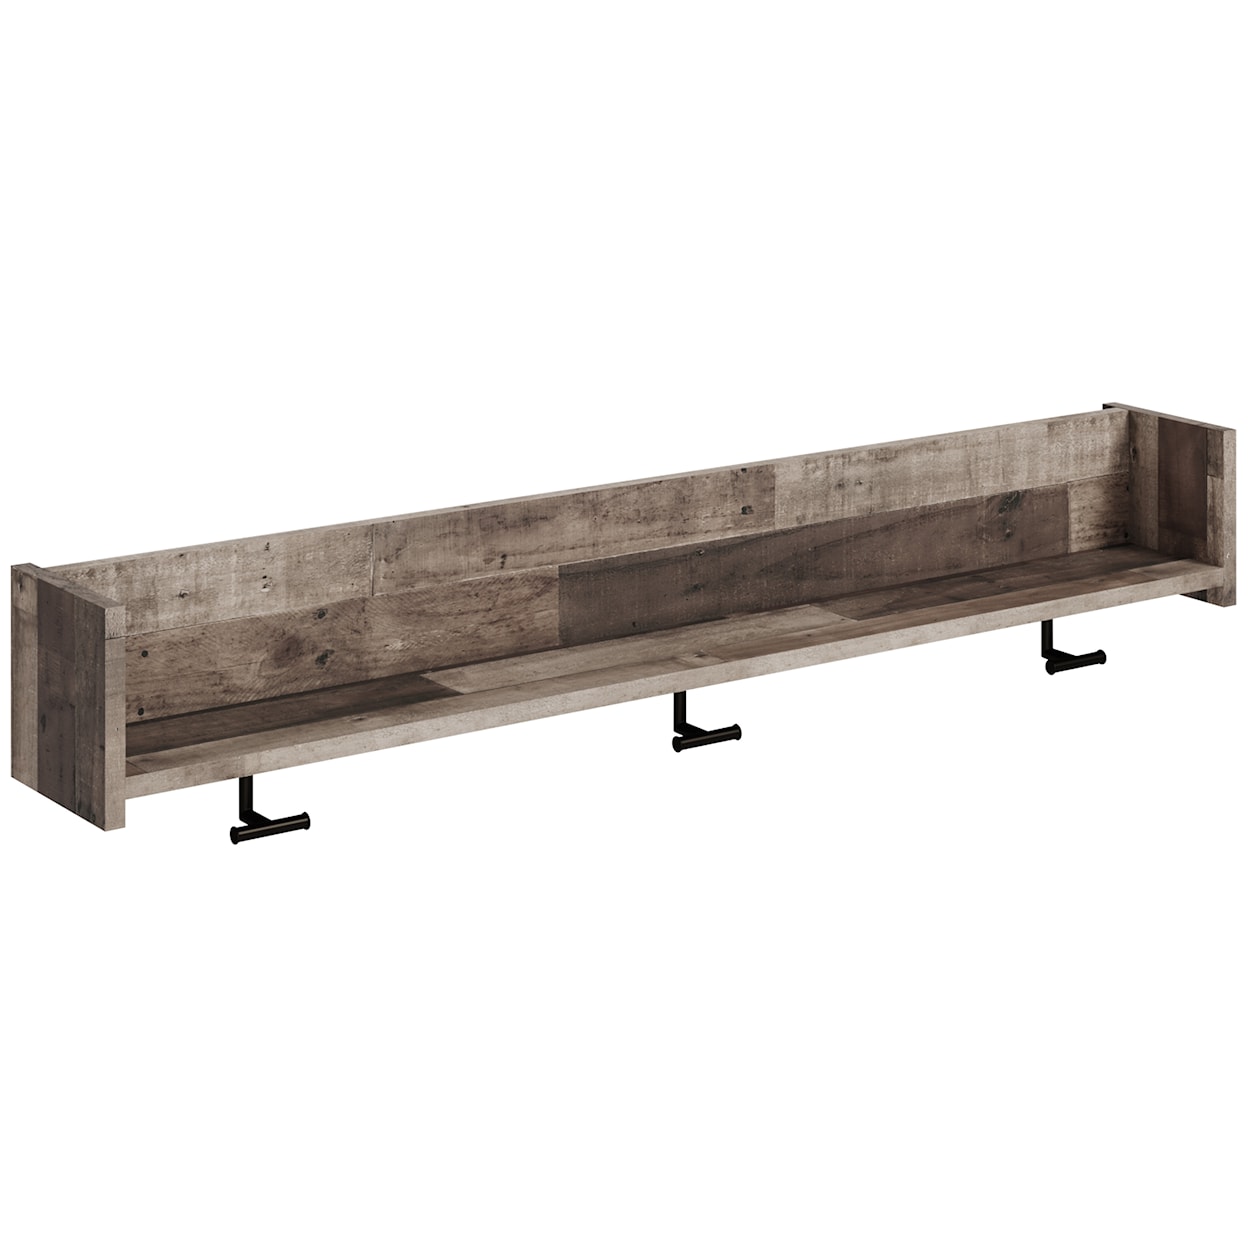 Signature Design by Ashley Neilsville Wall Mounted Coat Rack with Shelf